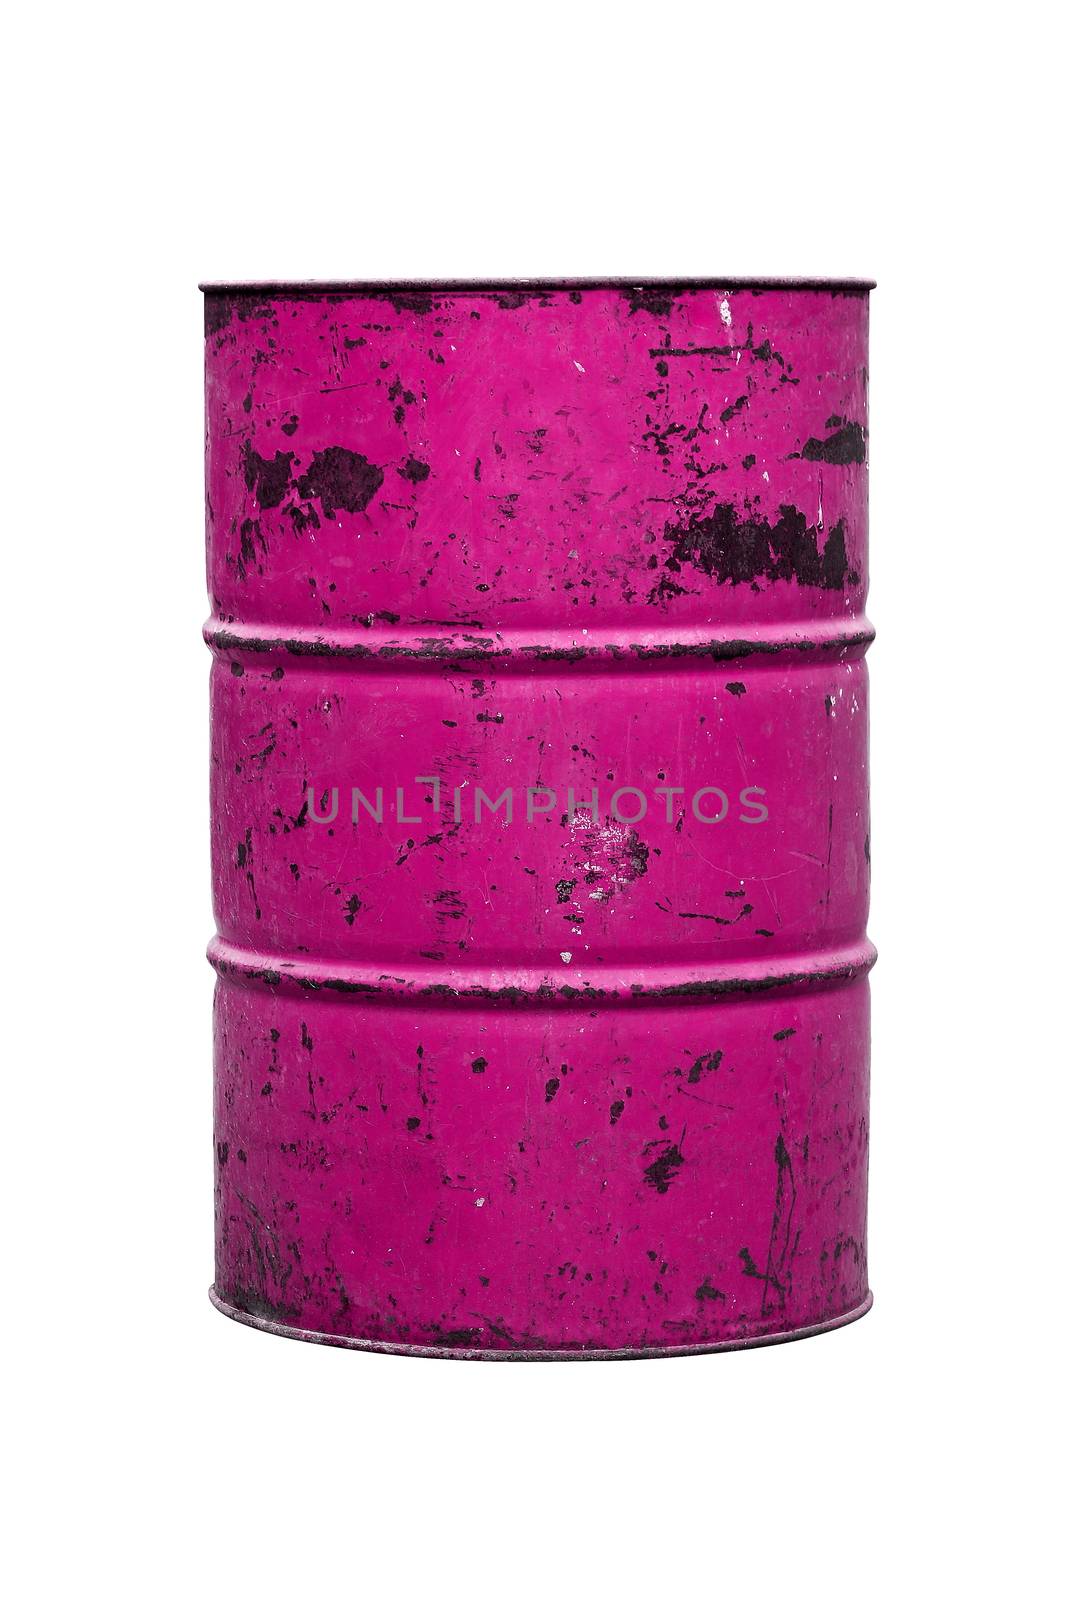 Barrel Oil pink or purple Old isolated on background white